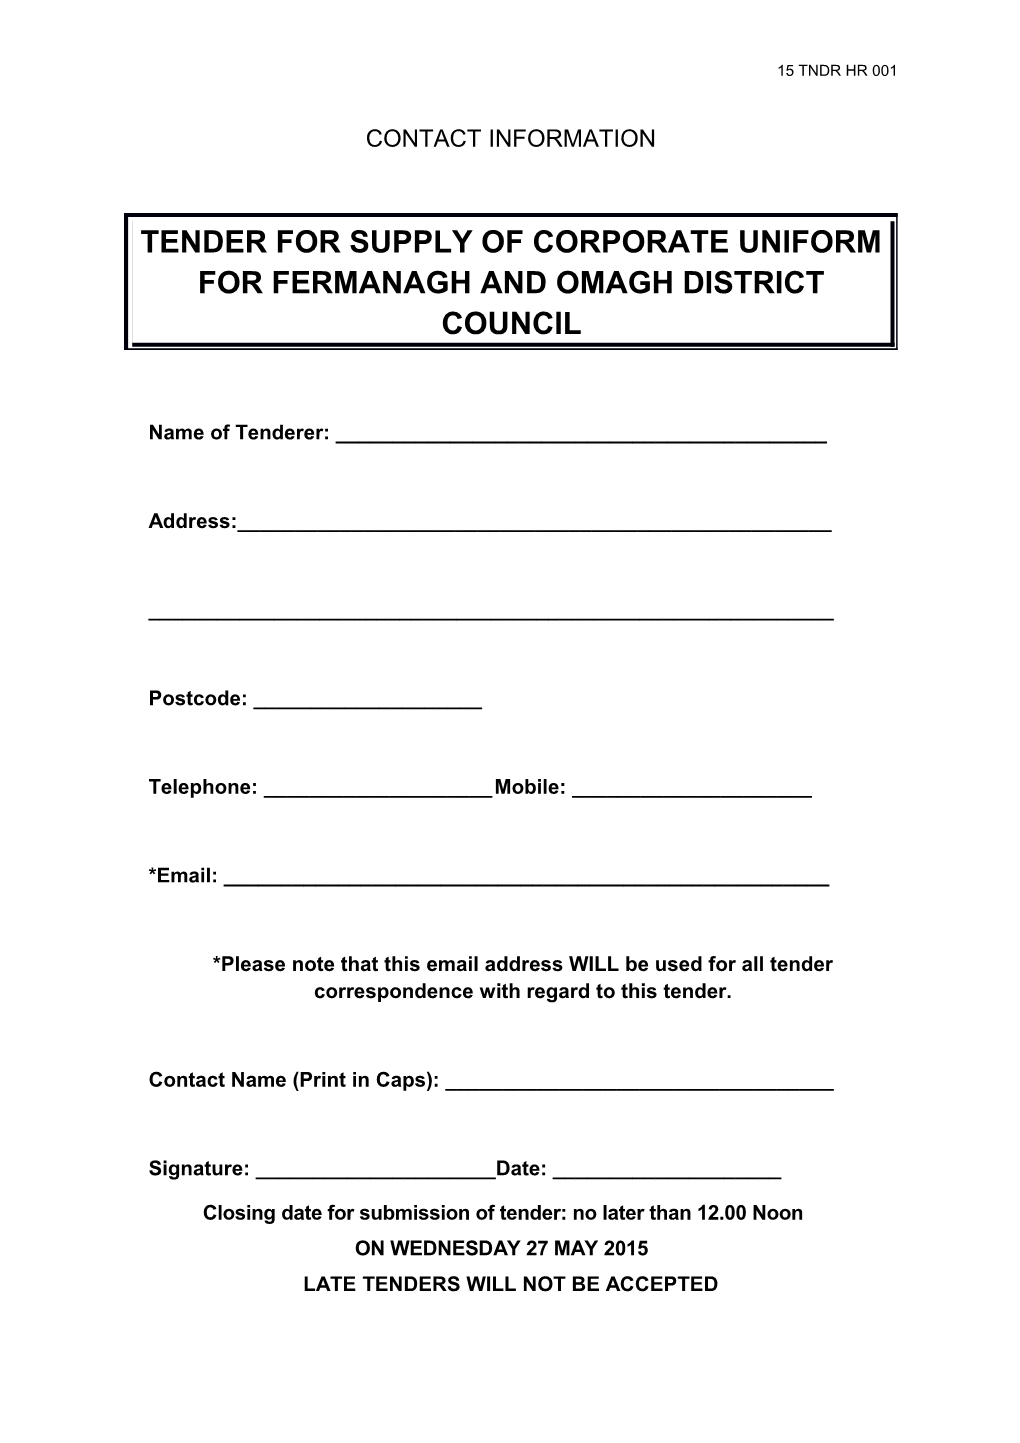 Tender for Supply of Corporate Uniform for Fermanagh and Omagh District Council